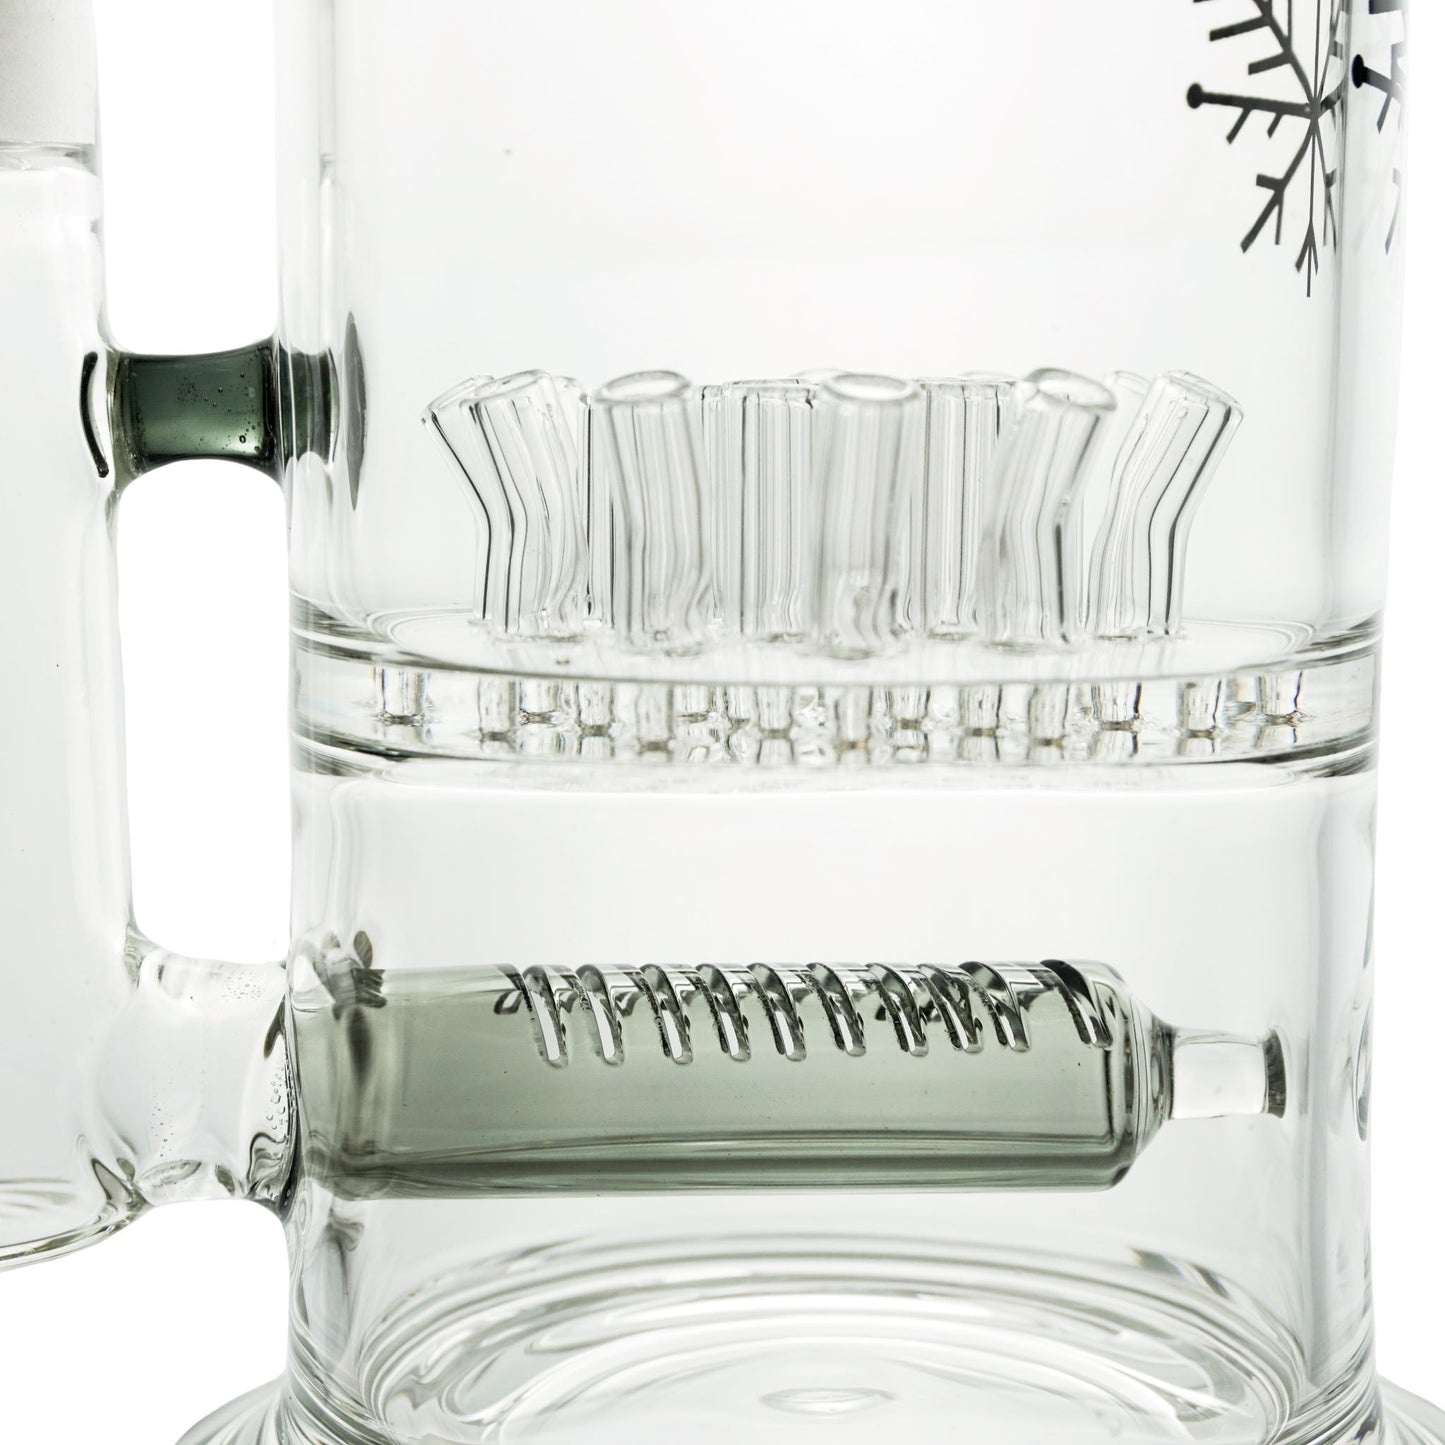 Freeze Pipe 16” Glycerin Coil Bong by Freeze Pipe | Mission Dispensary